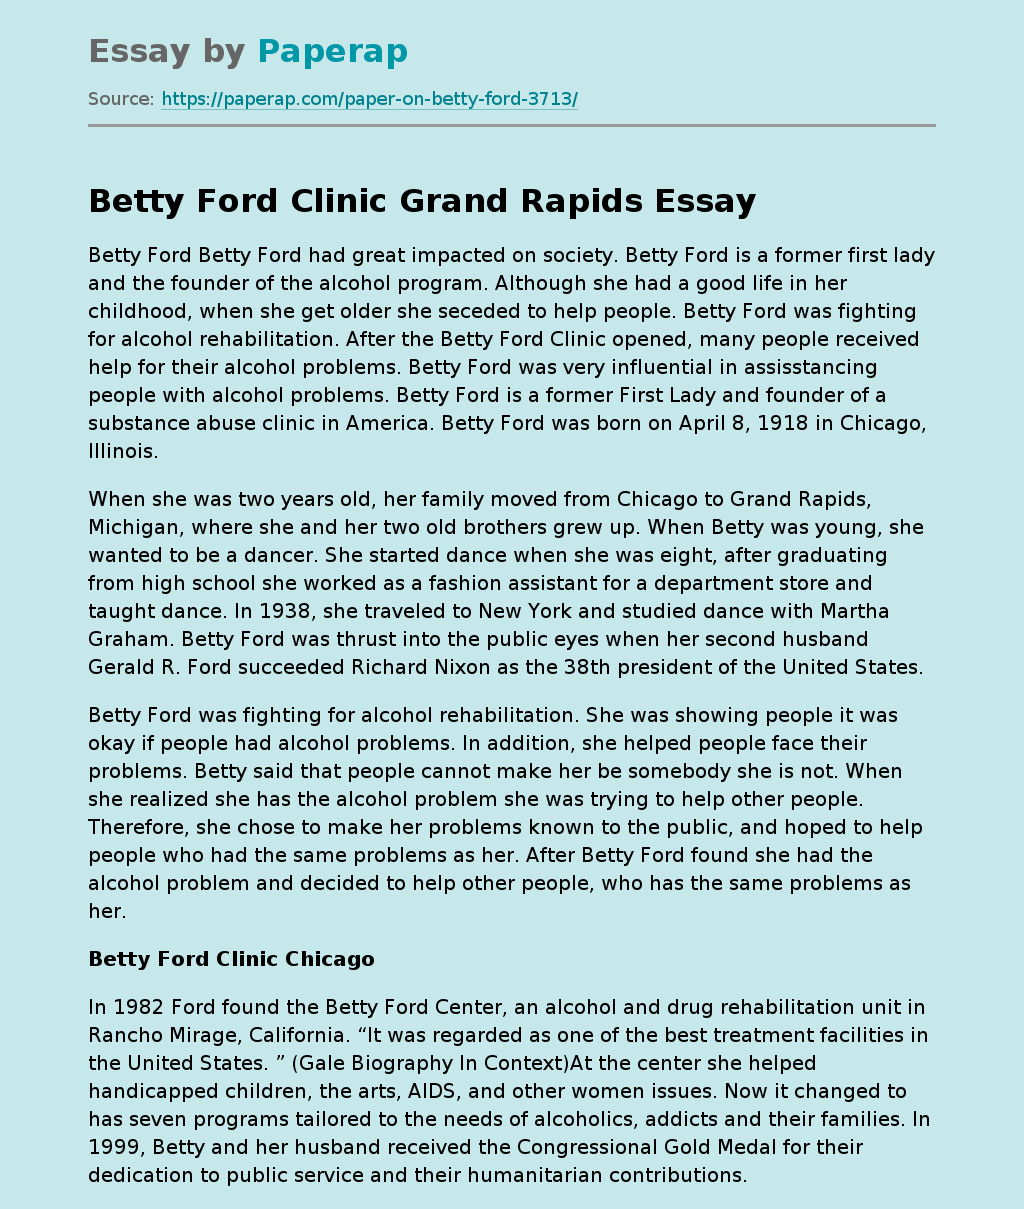 Betty Ford Clinic Grand Rapids